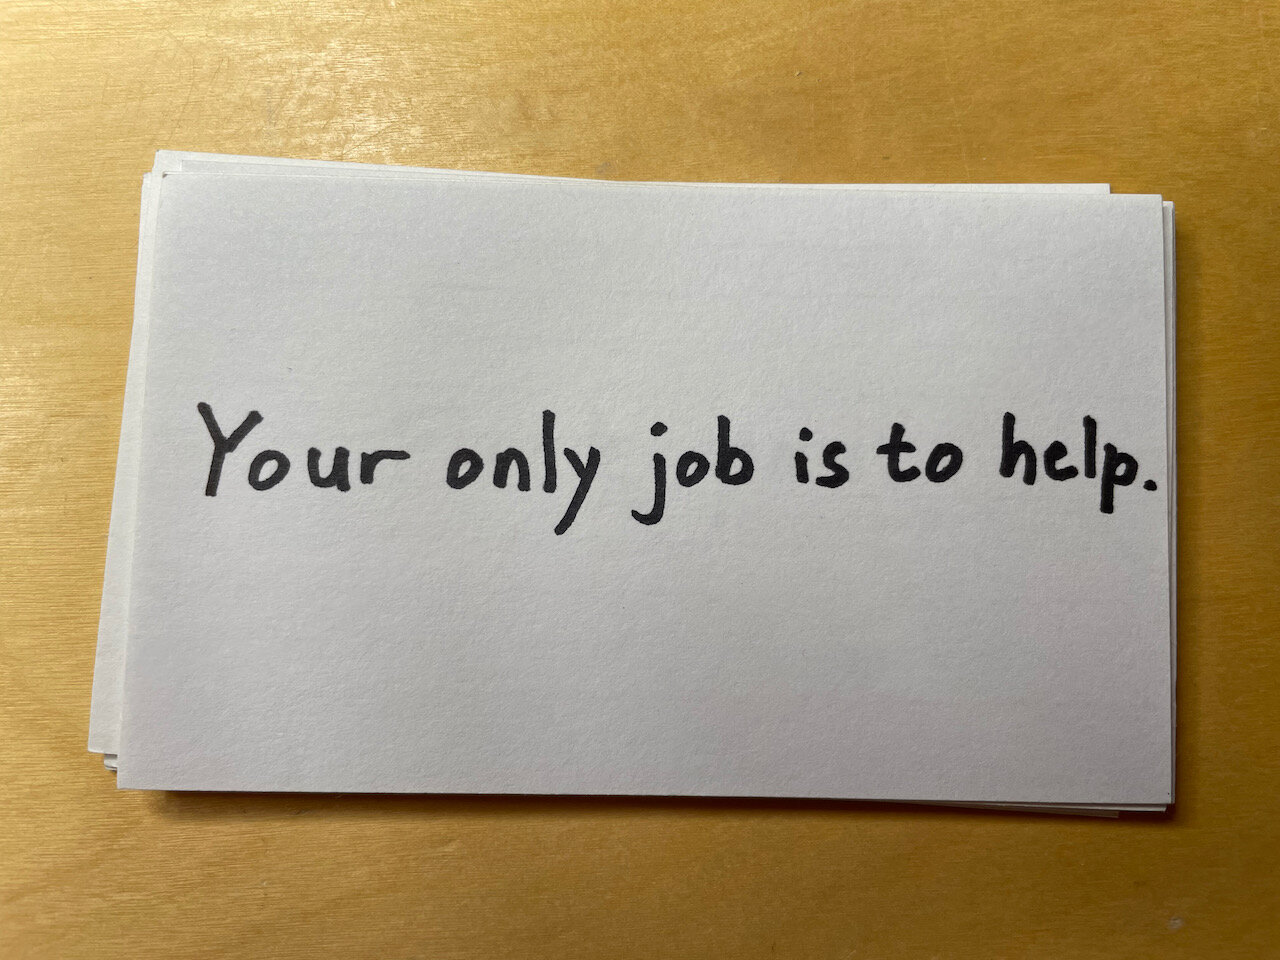 Your only job is to help.